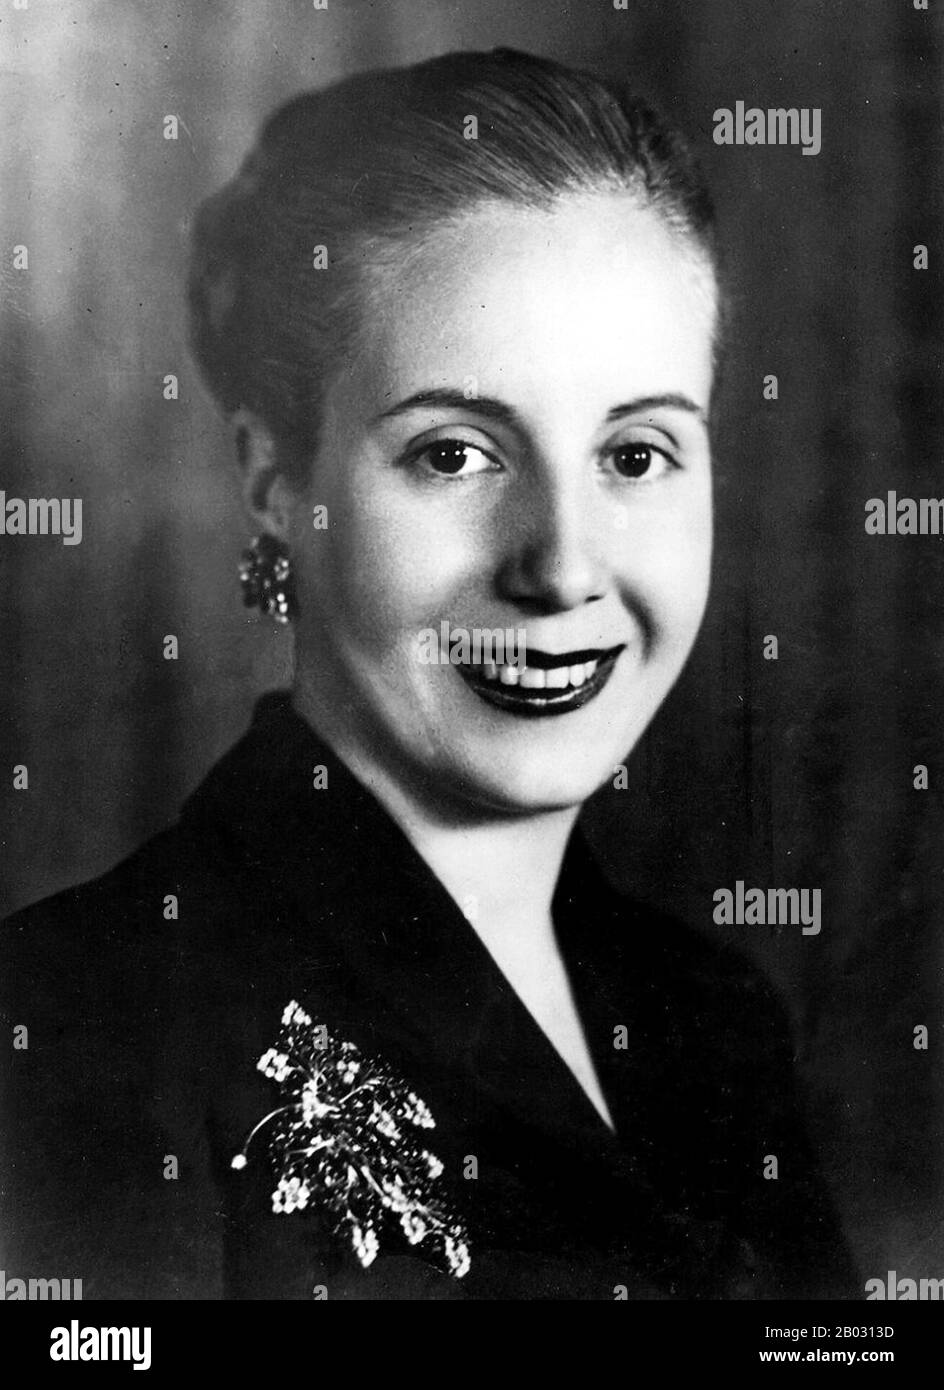 Maria Eva Duarte de Peron (7 May 1919 – 26 July 1952) was the second wife of Argentine President Juan Peron (1895–1974) and served as the First Lady of Argentina from 1946 until her death in 1952.  She is usually referred to as Eva Peron, or by the affectionate Spanish language diminutive Evita. Stock Photo